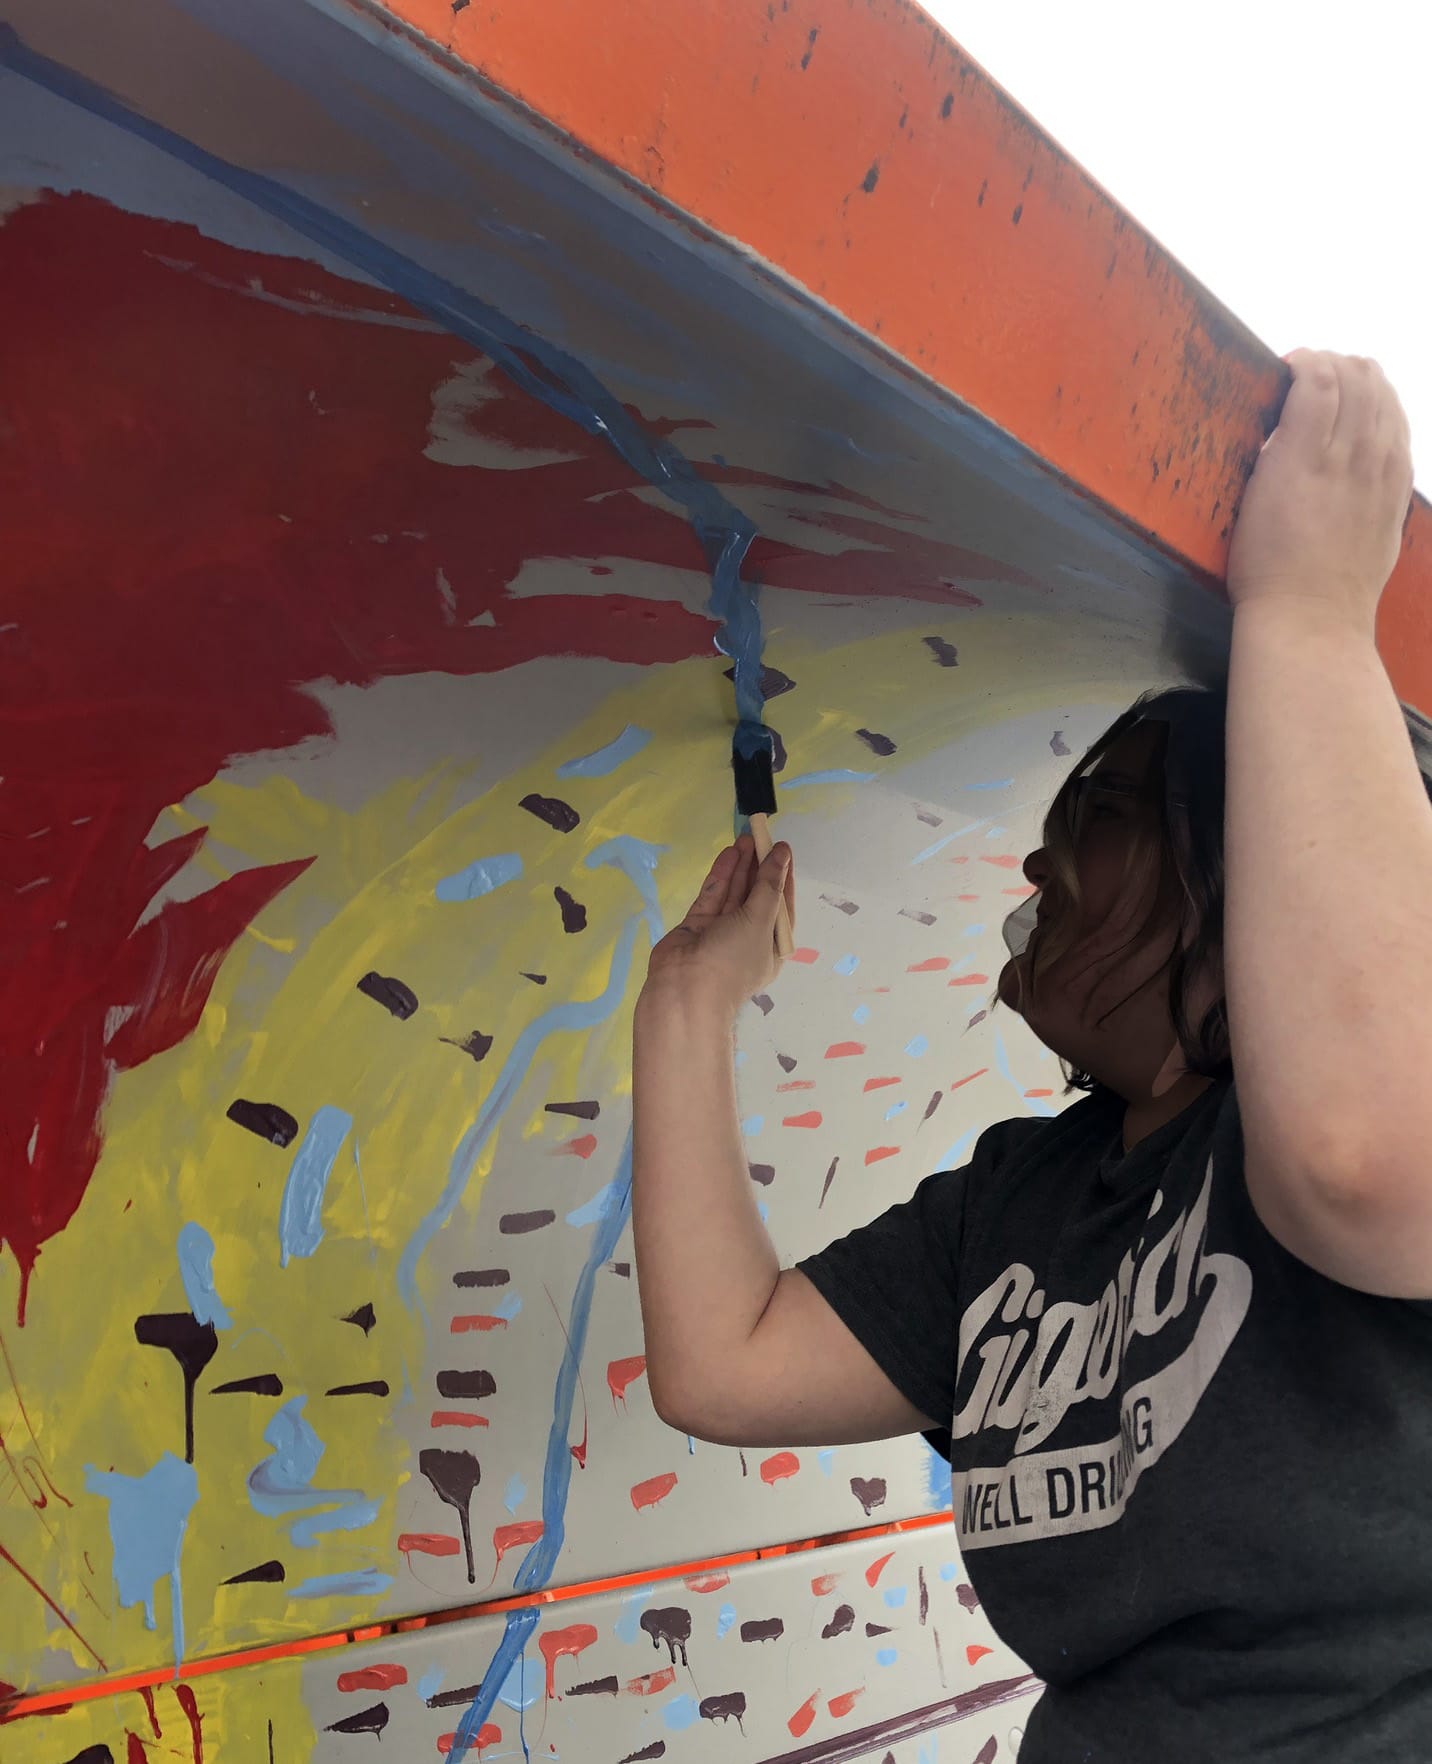 Cedar Rapids Day Habilitation recently participated in a Paint a Plow Project. 